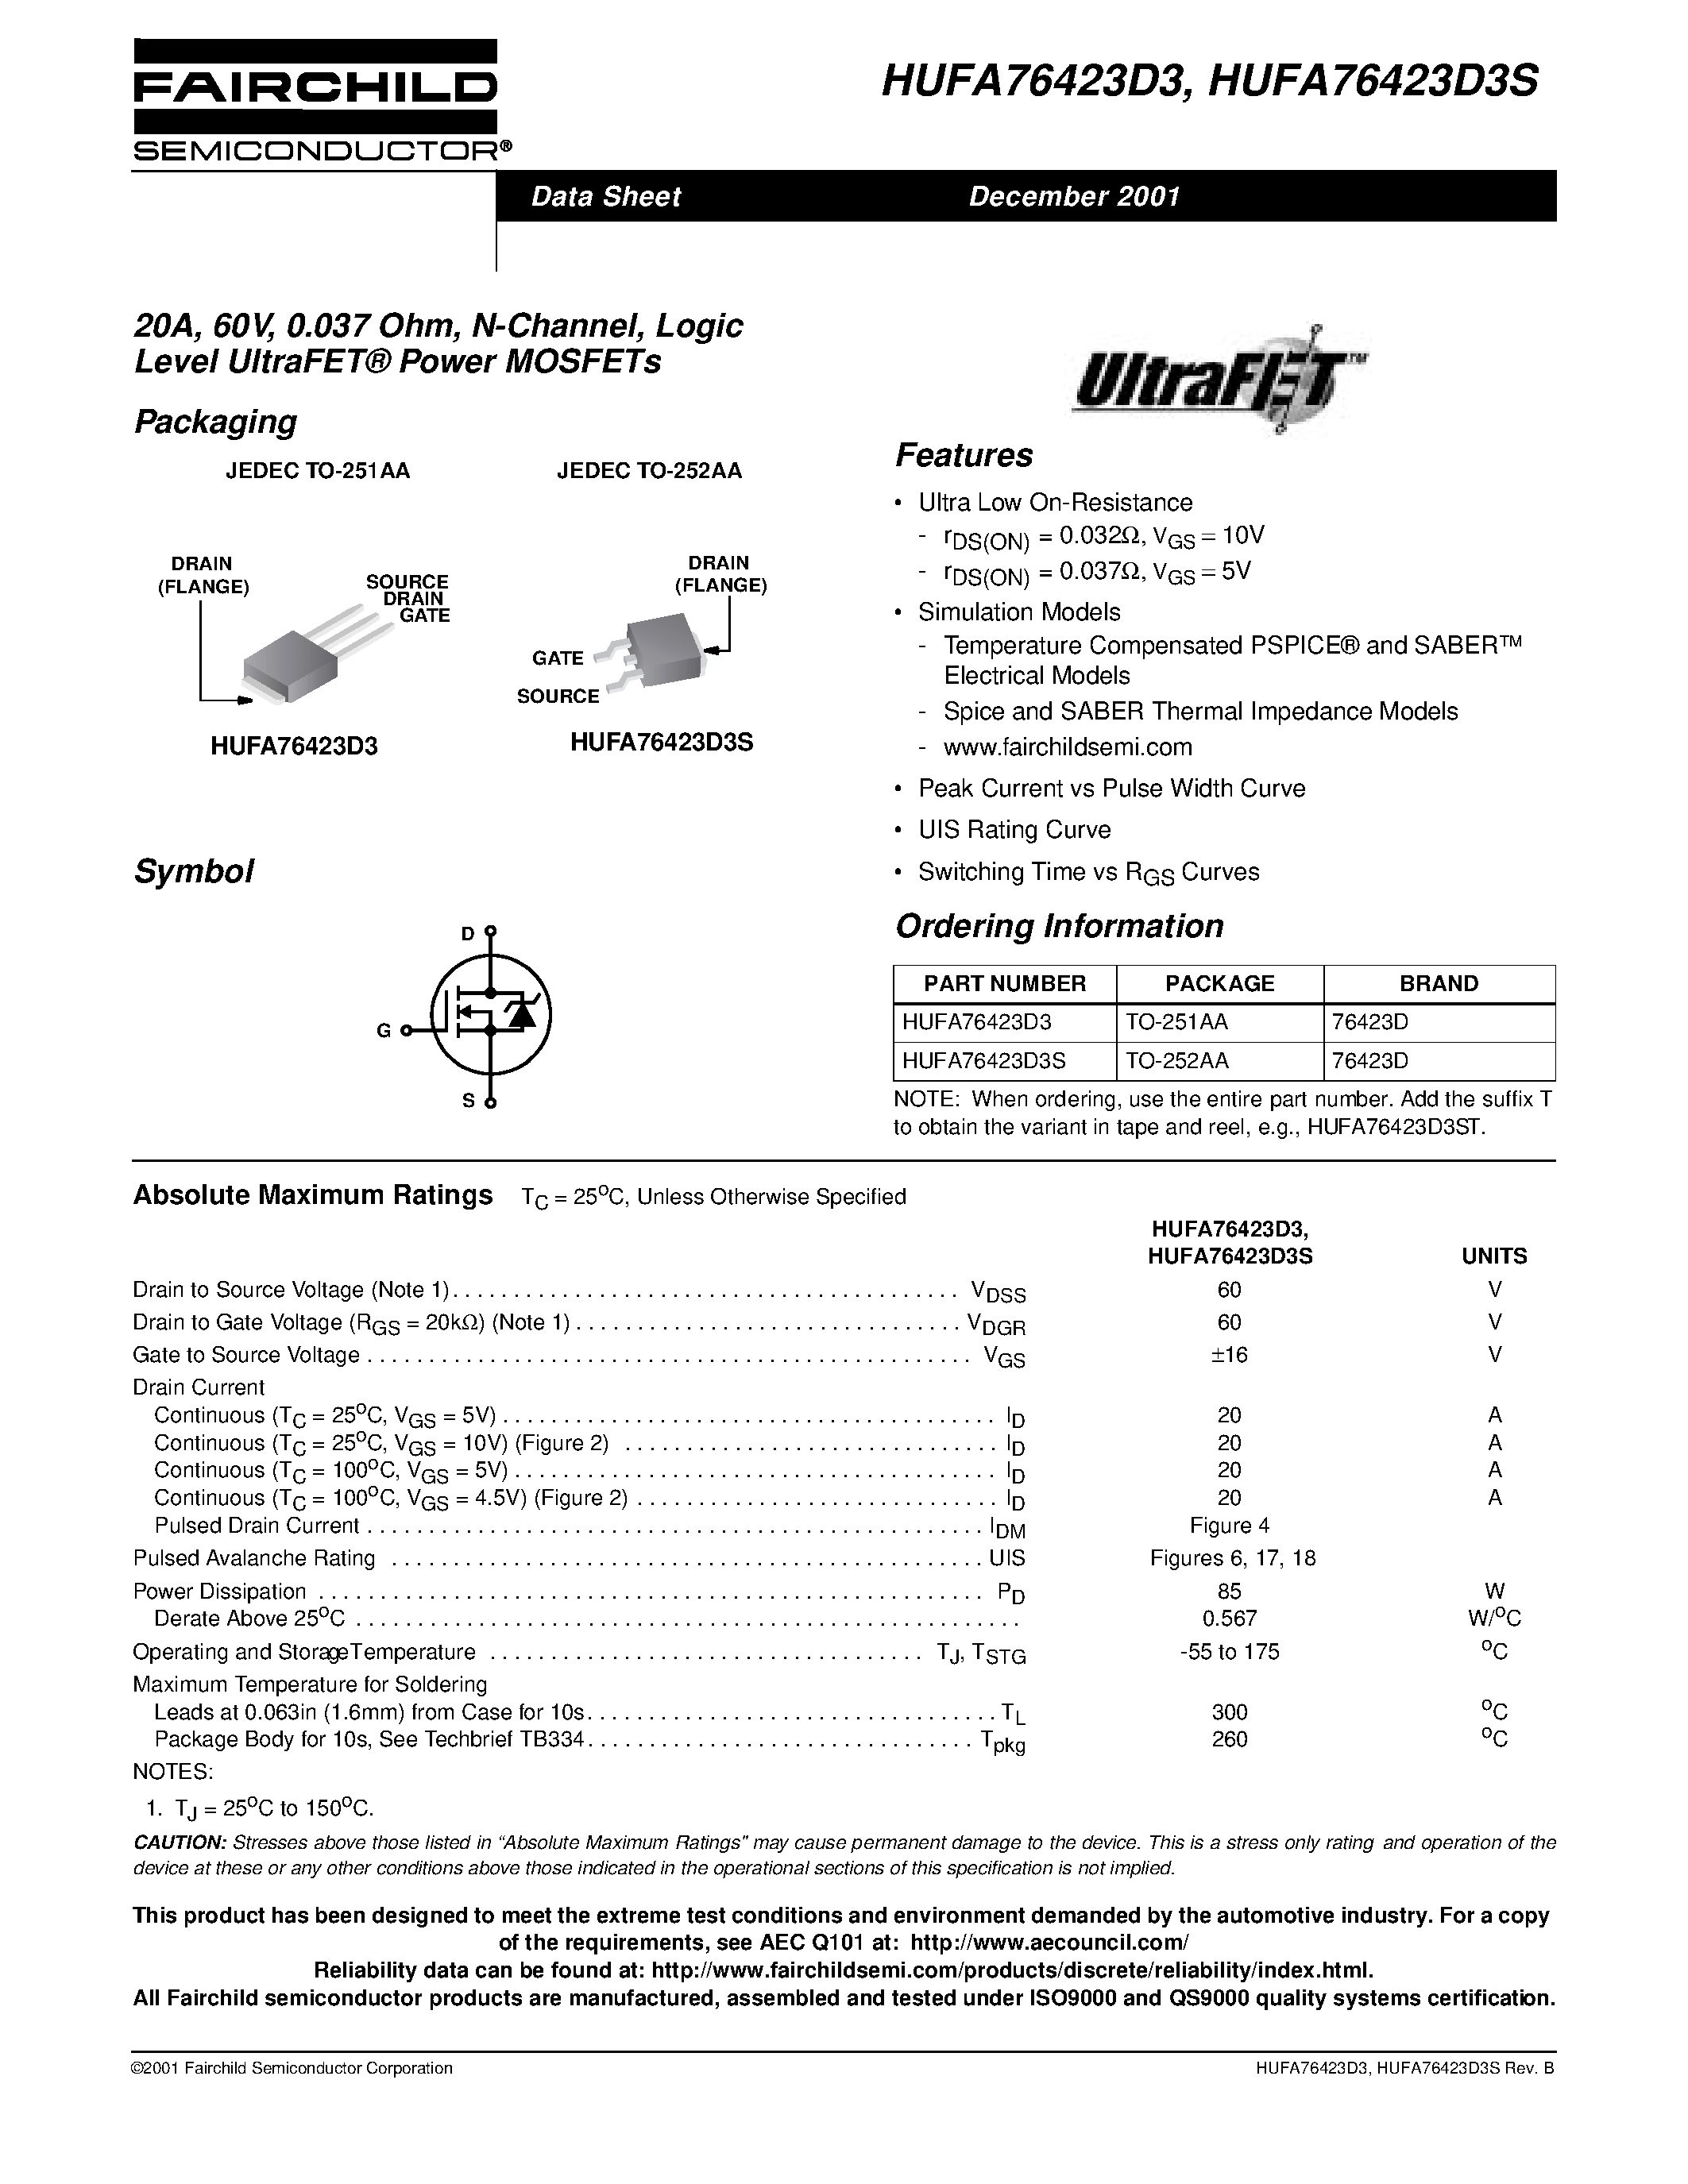 Datasheet HUFA76423D3S - 20A/ 60V/ 0.037 Ohm/ N-Channel/ Logic Level UltraFET Power MOSFETs page 1